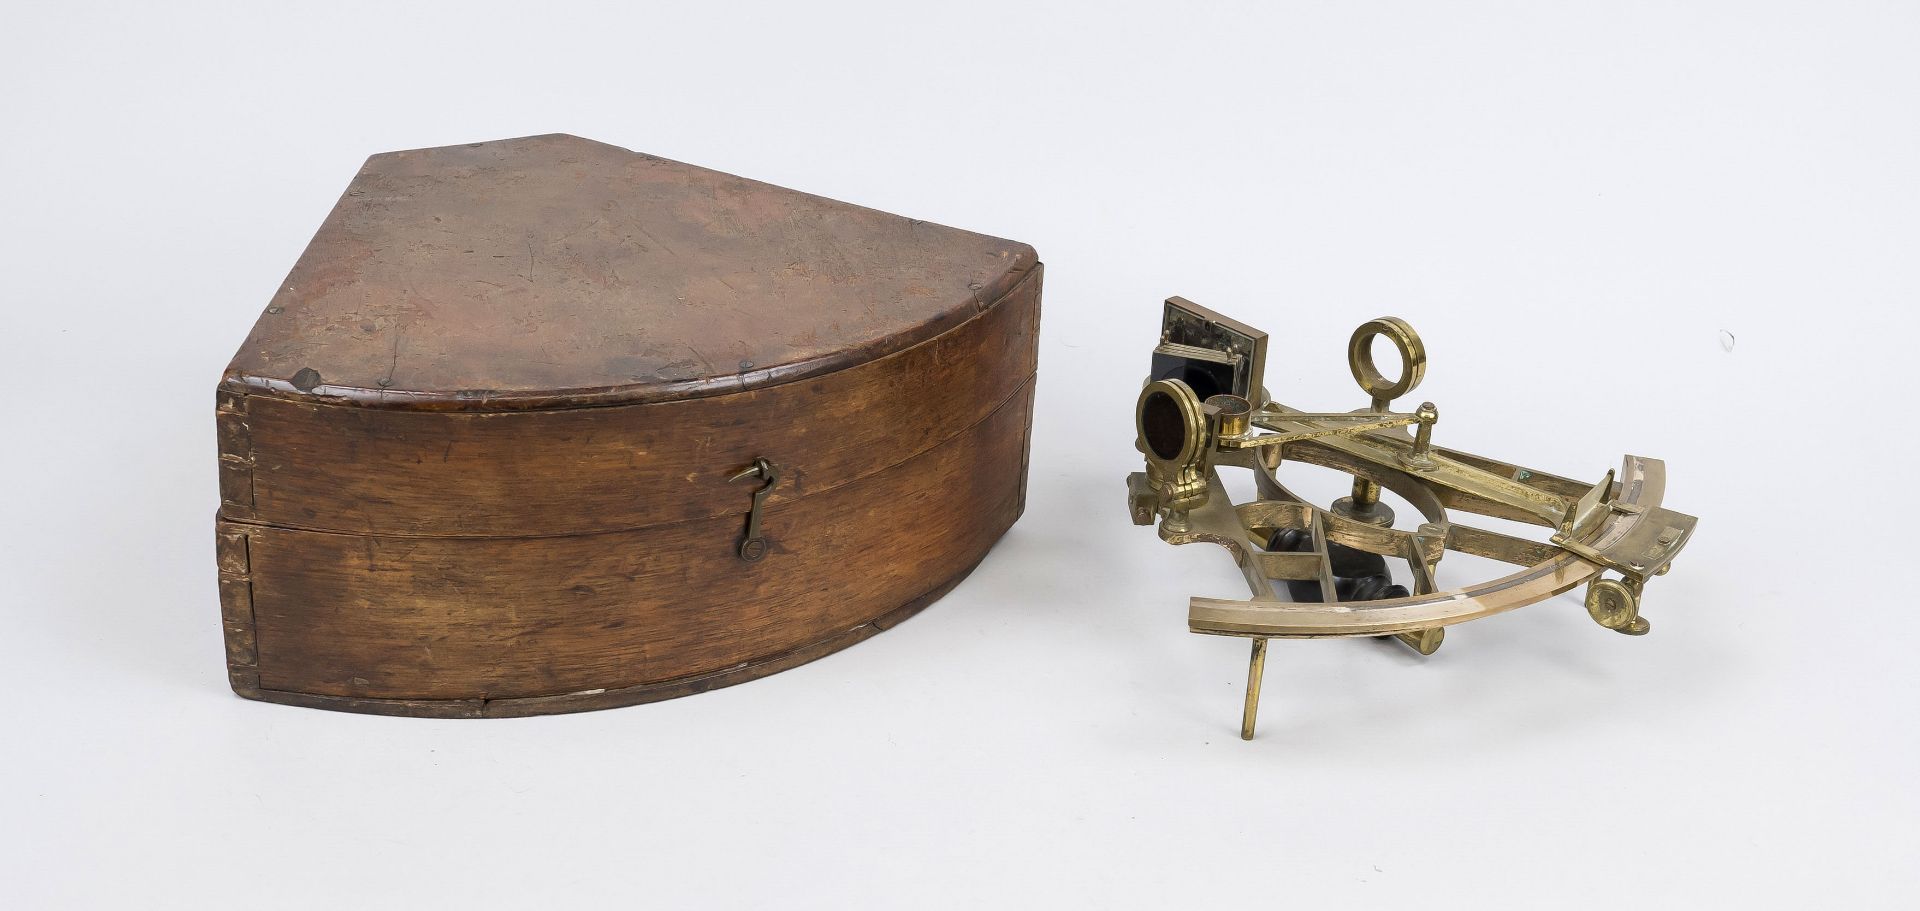 Sextant, 19th century, brass with an element of turned wood. 2 optics for insertion. In matching